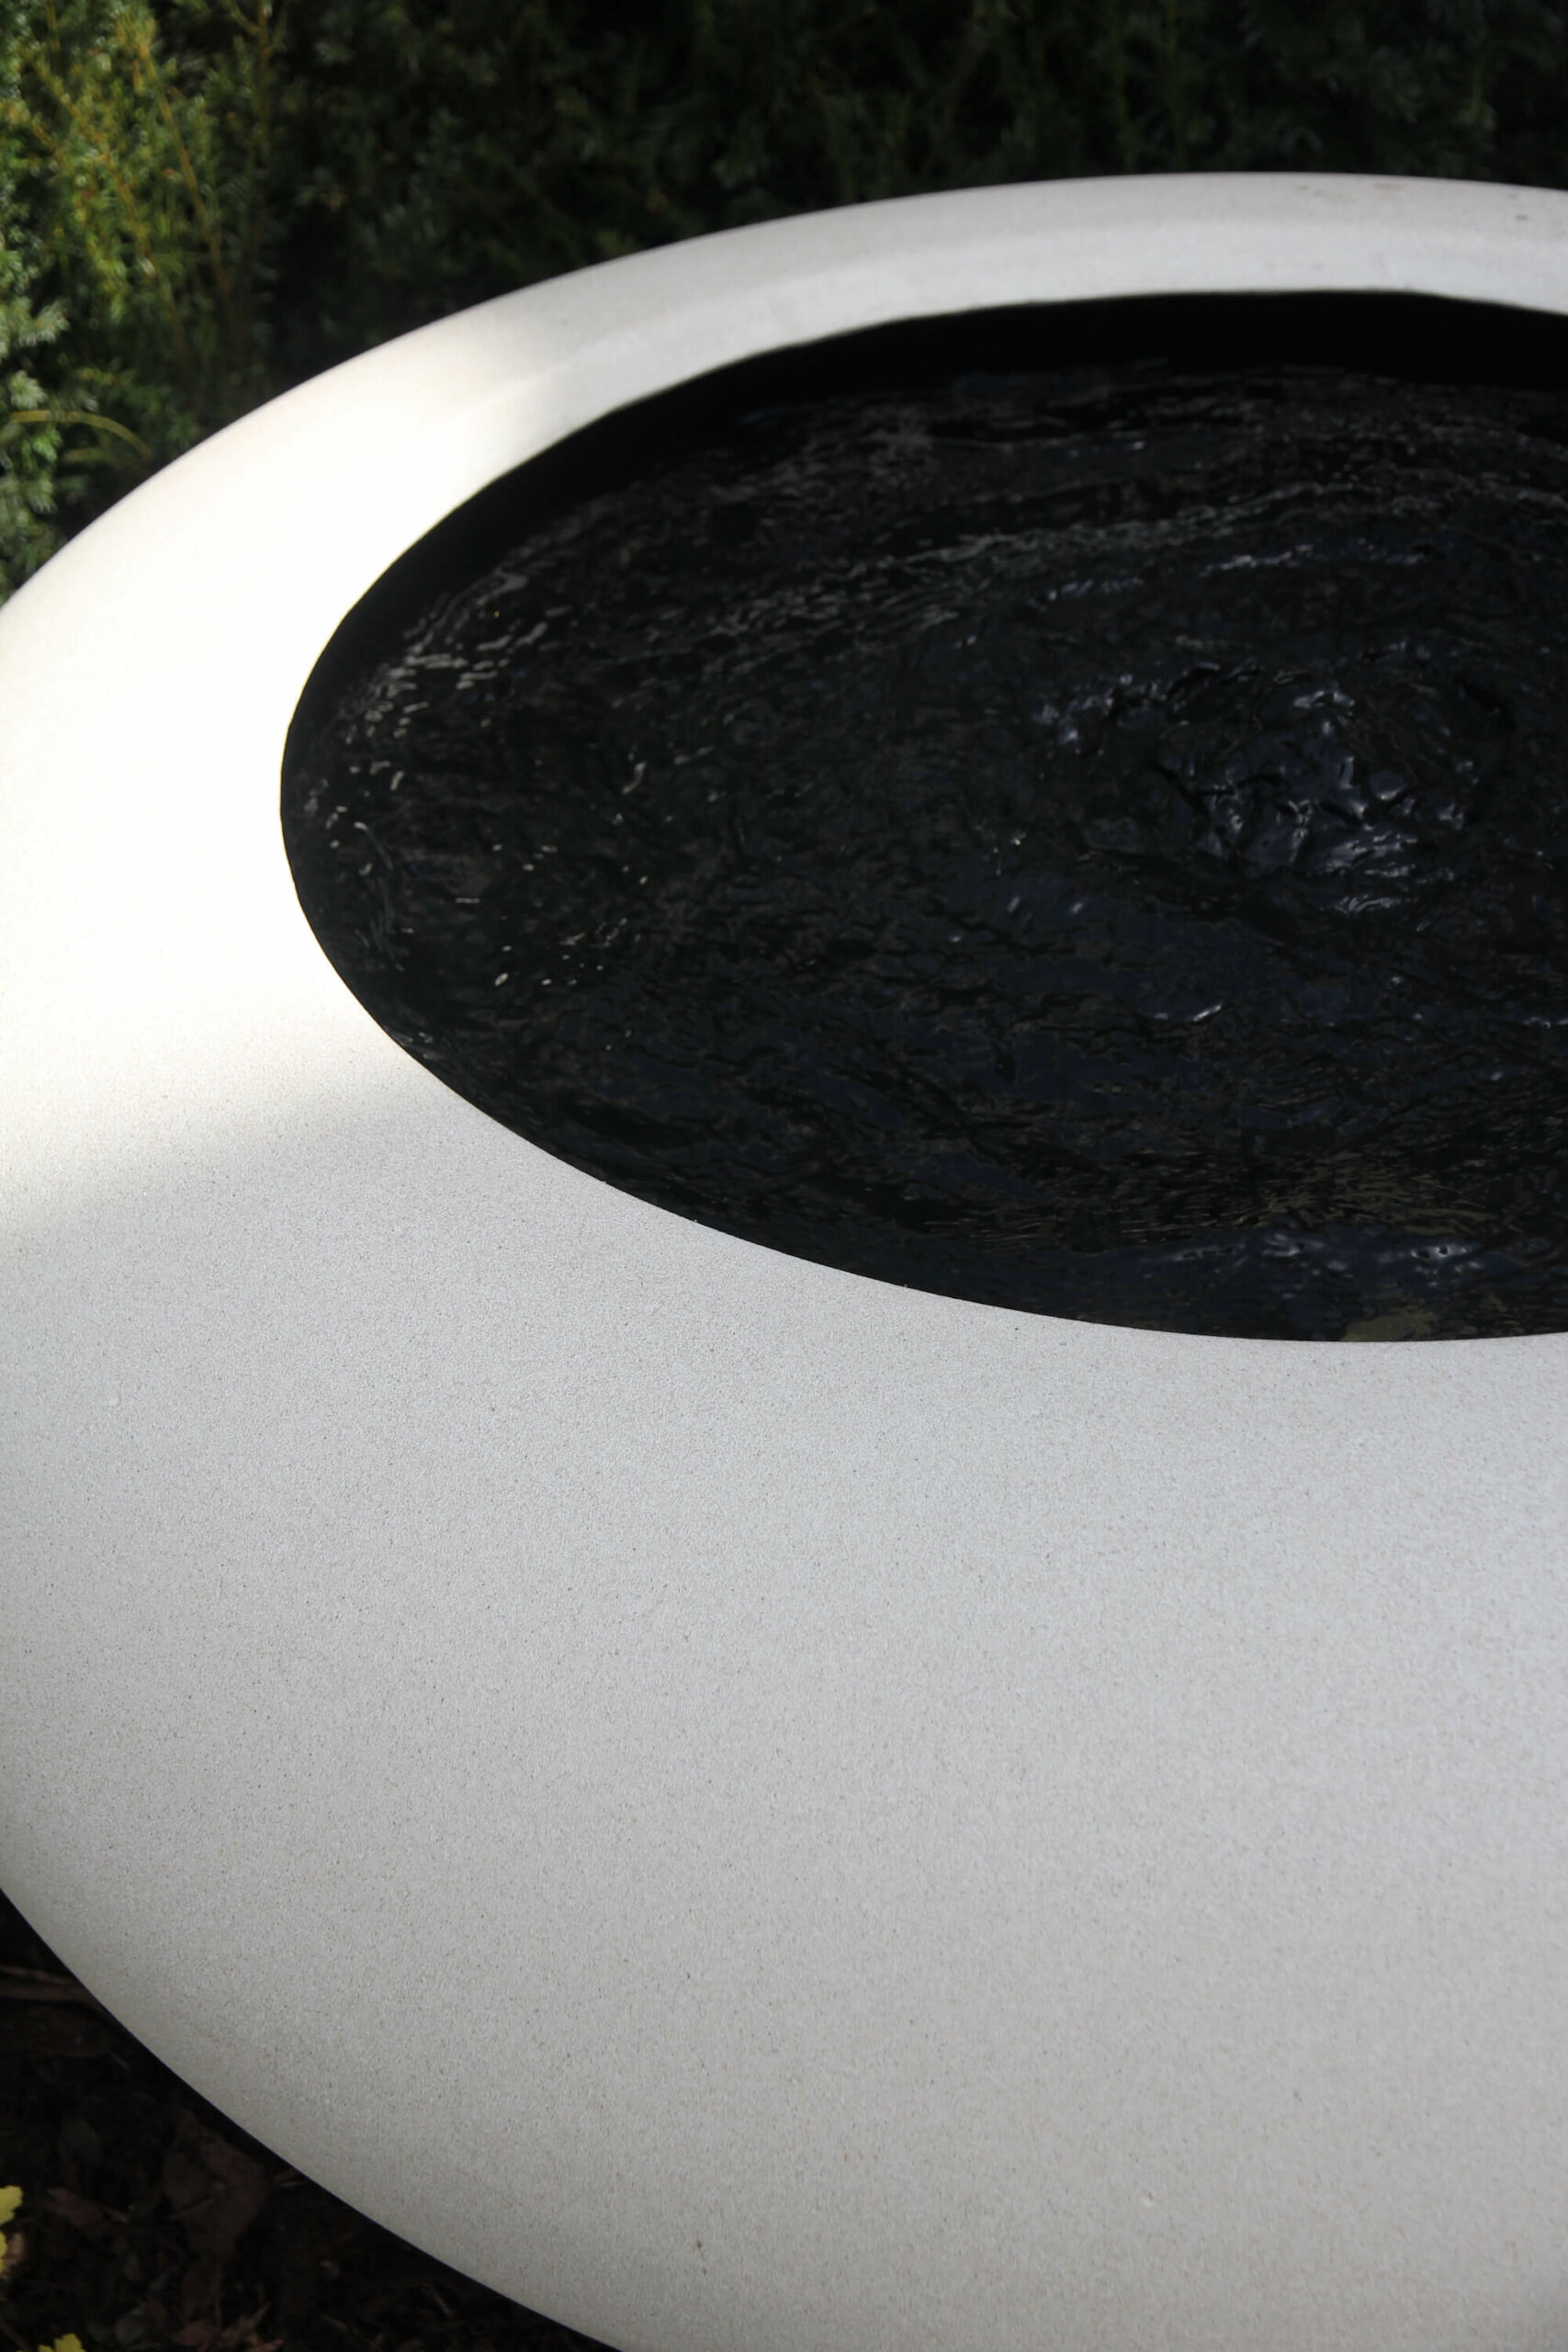 white garden water feature bowl and black water